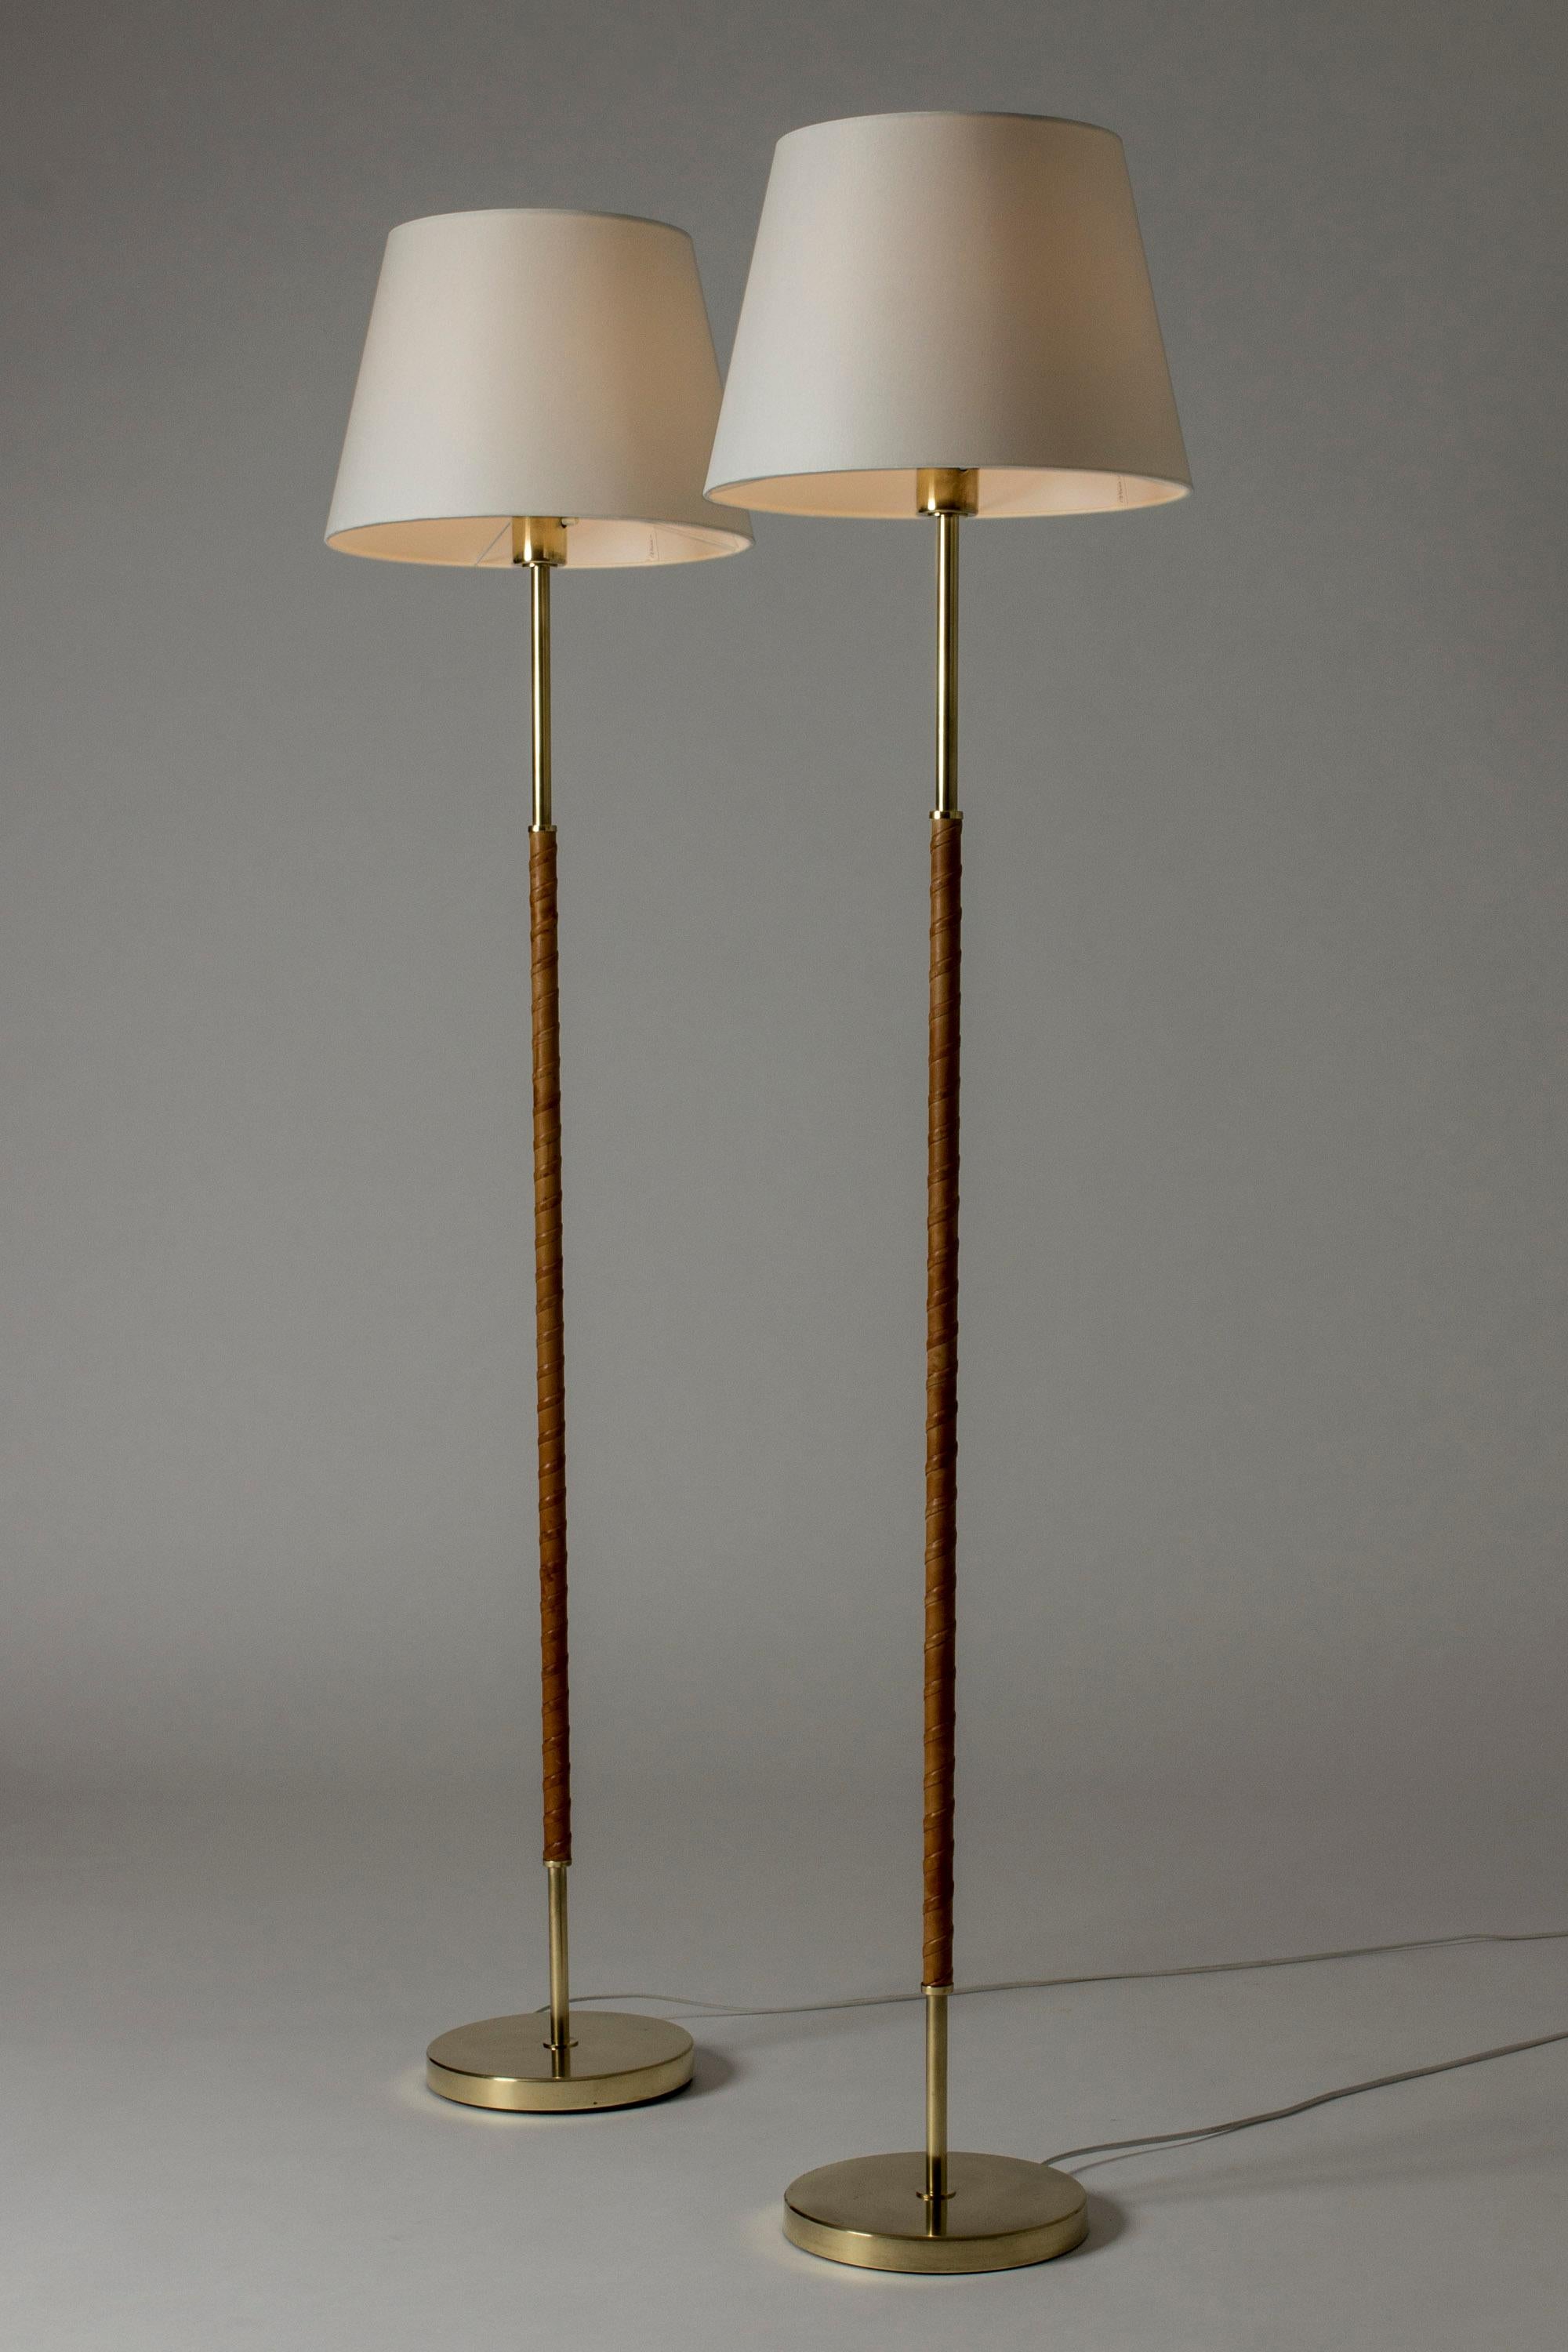 Swedish Pair of Brass and Leather Floor Lamps from Böhlmarks, Sweden, 1950s